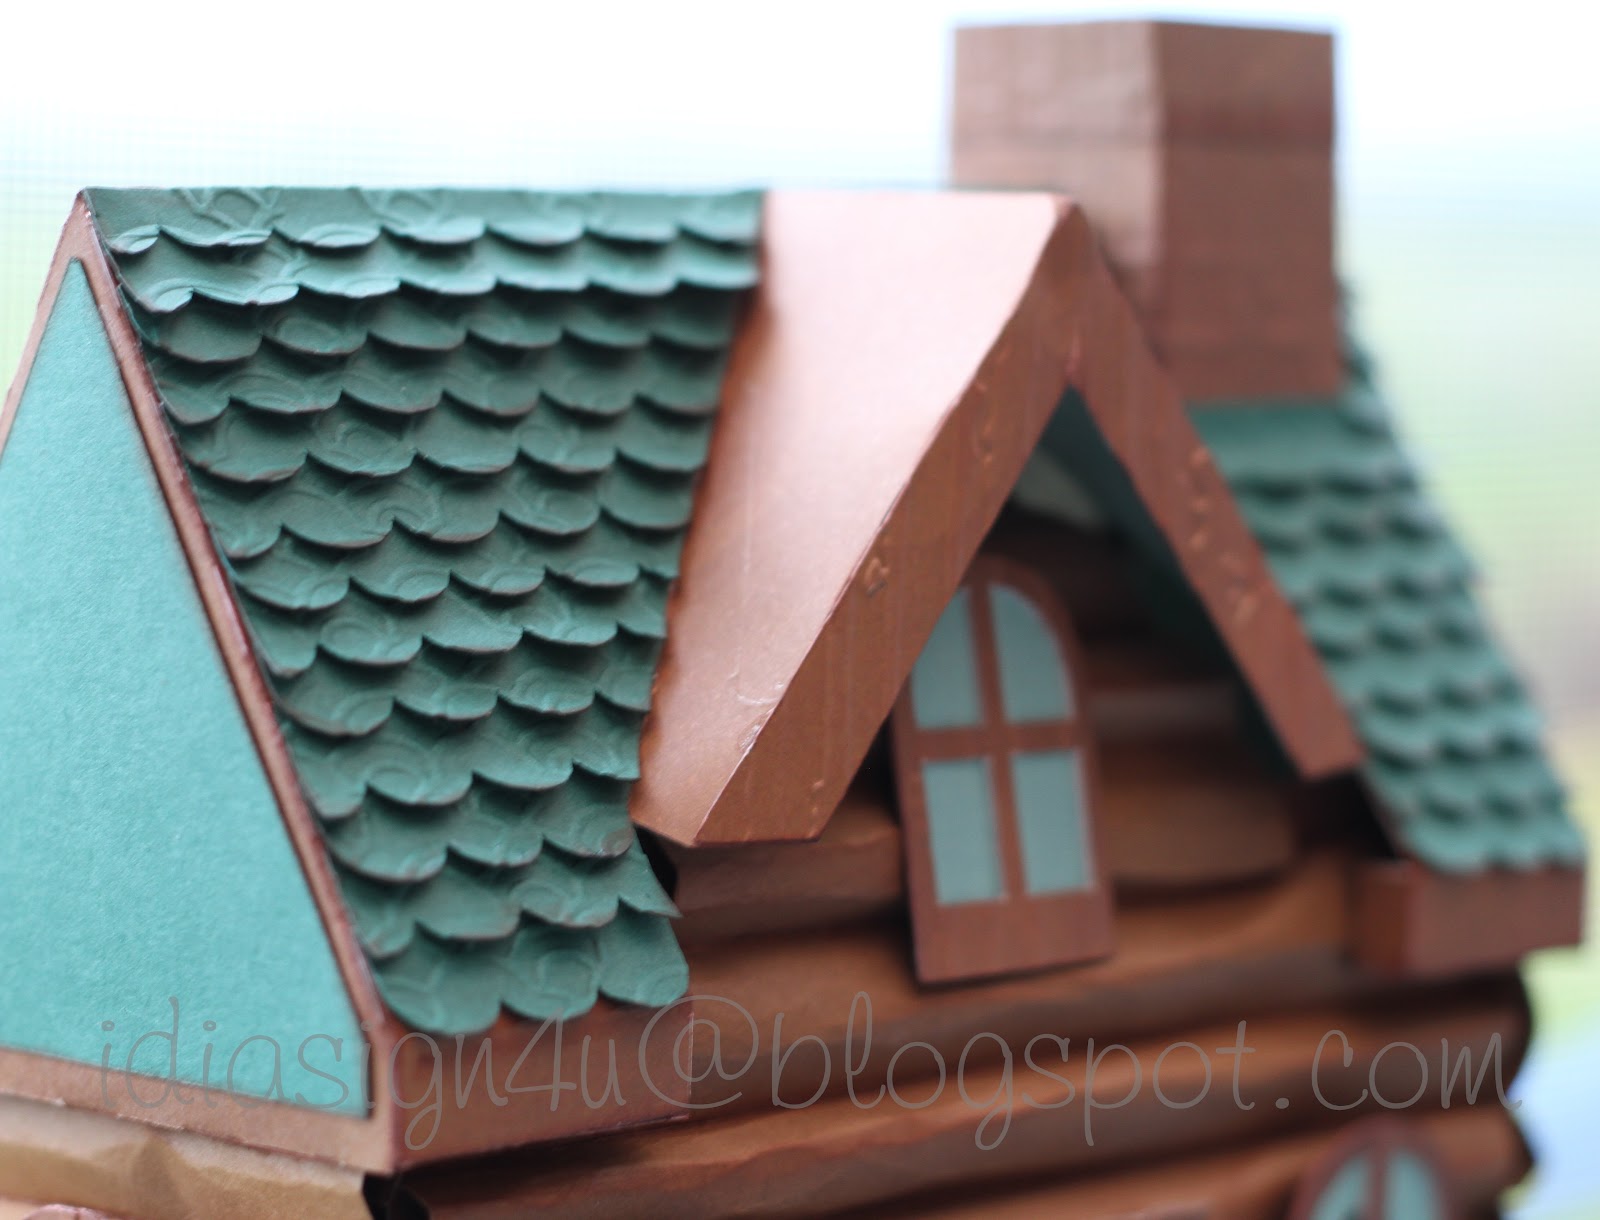 I Love Doing All Things Crafty: 3D Paper Log Cabin and Boat Treat Boxes, Father's Day SVGCuts Challenge Entry